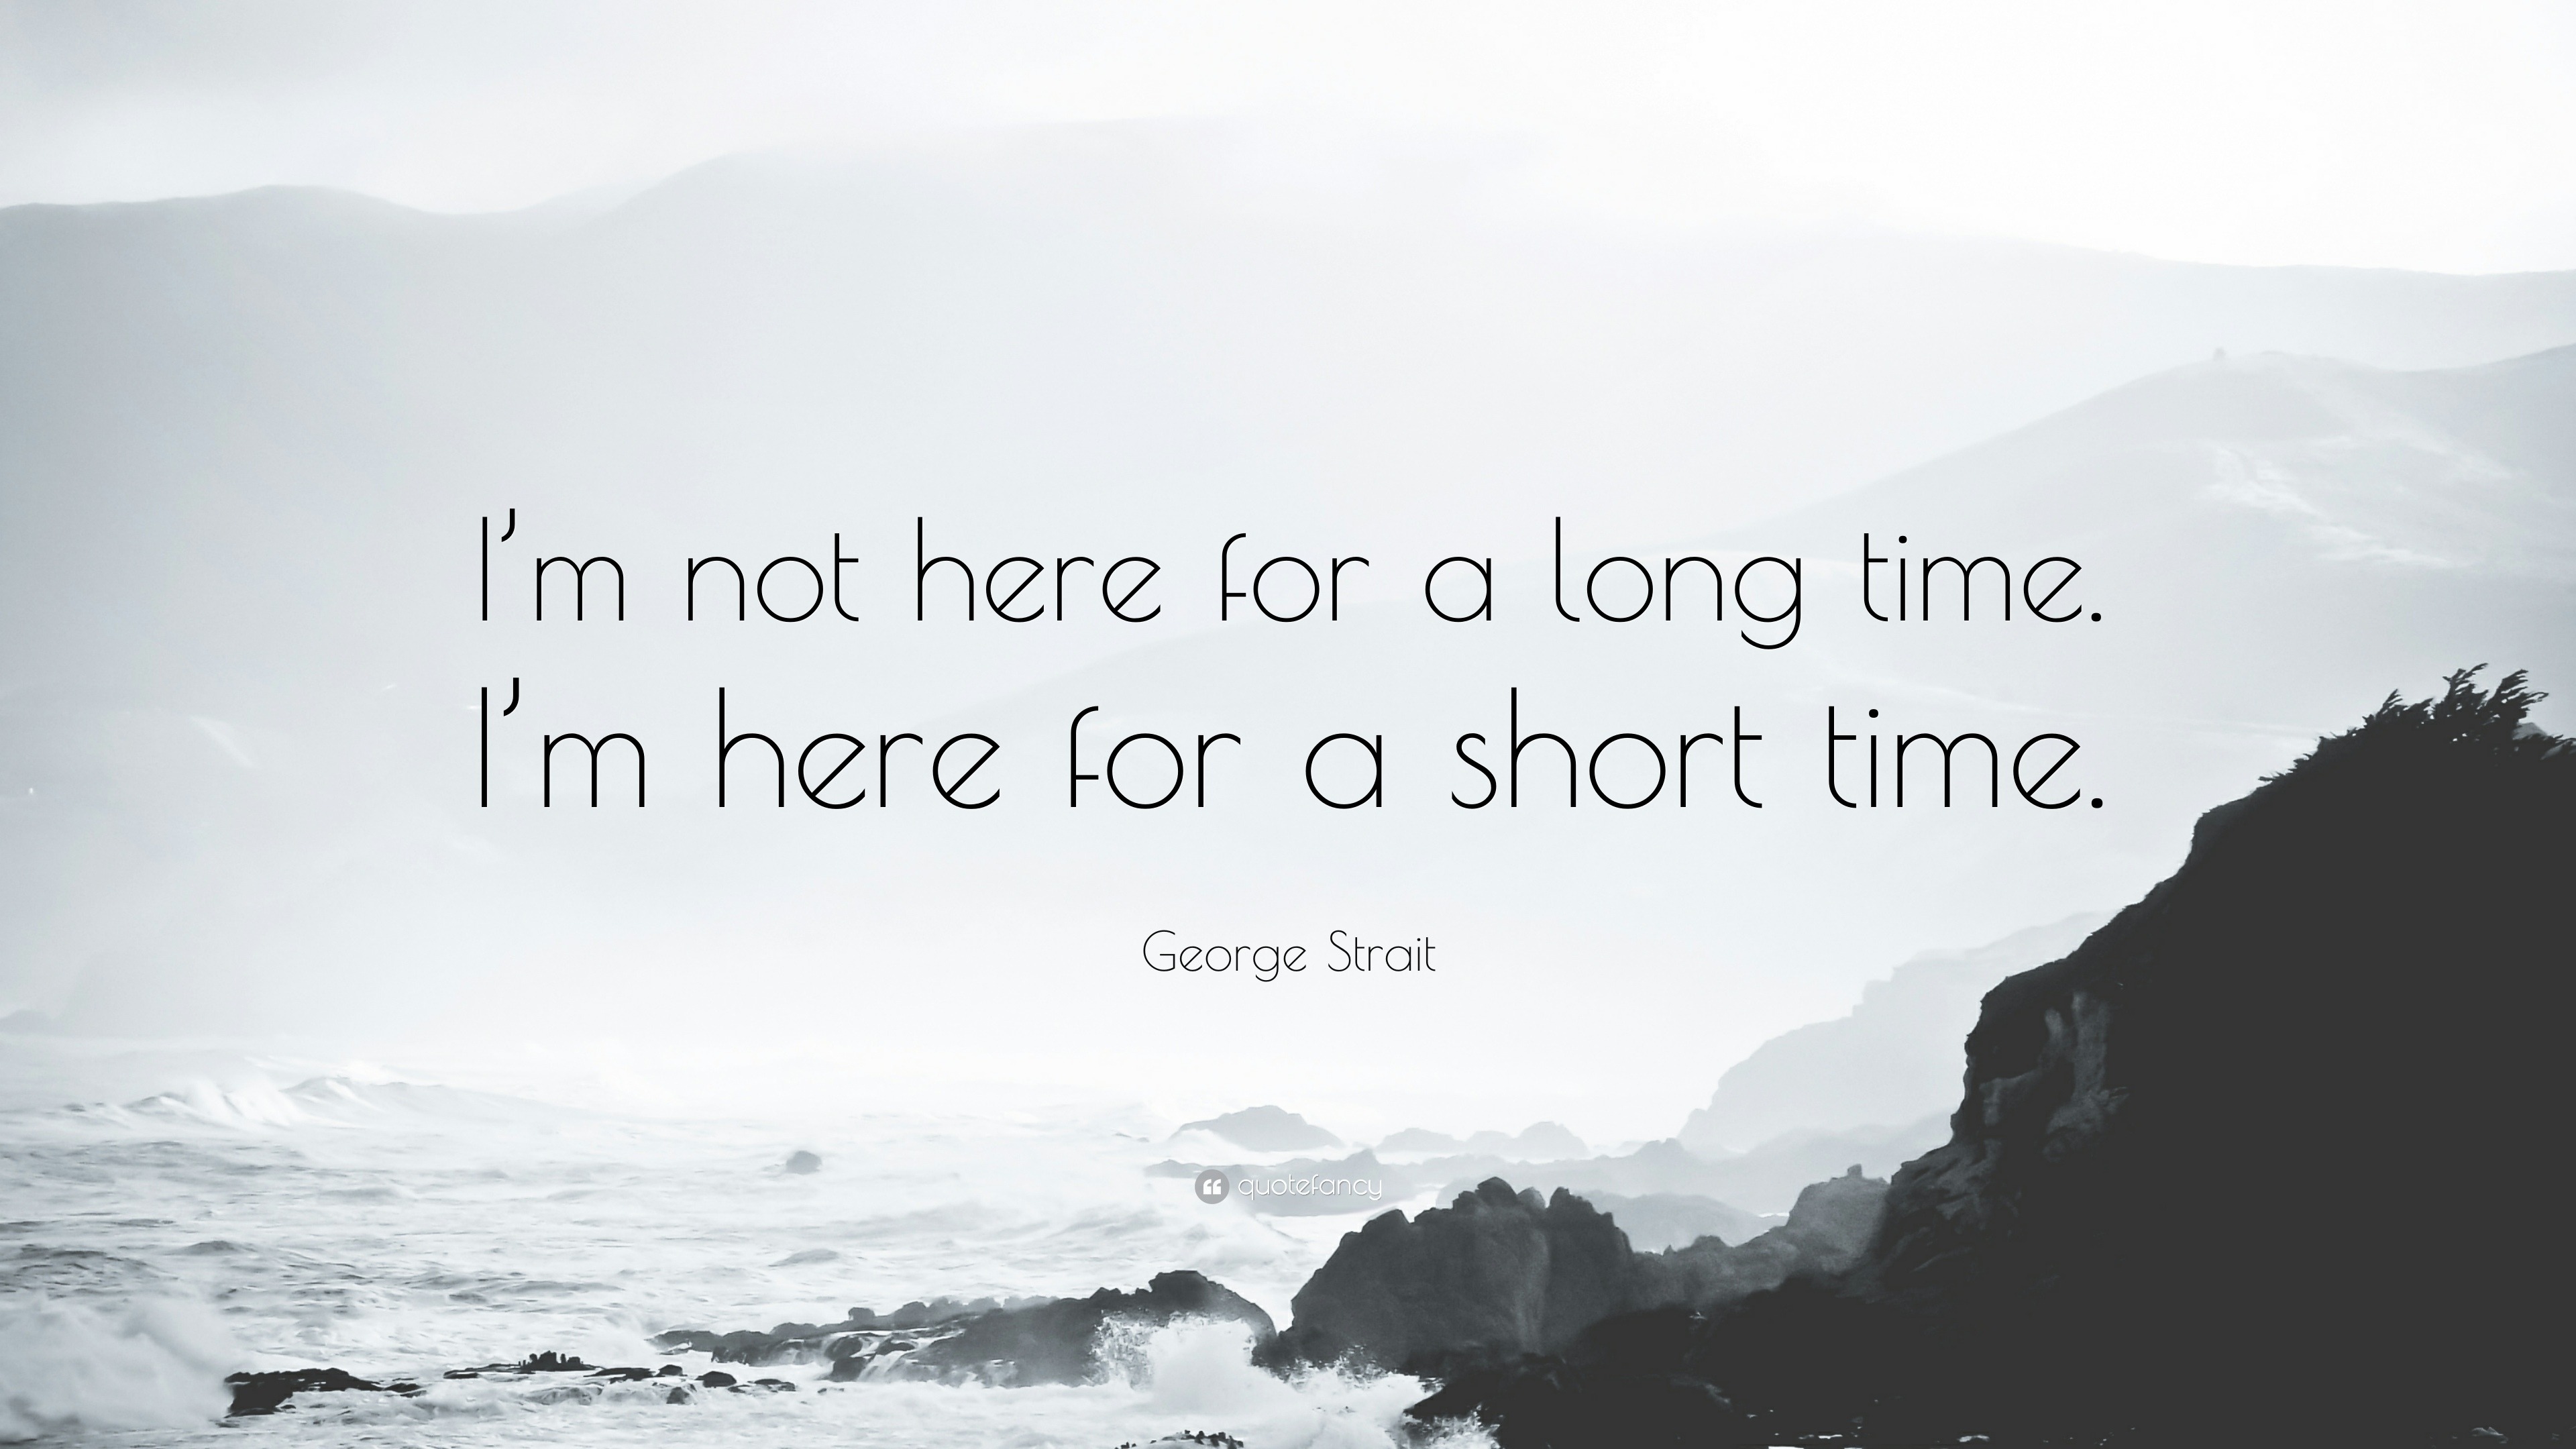 George Strait Quote: “I'm not for a long time. for a